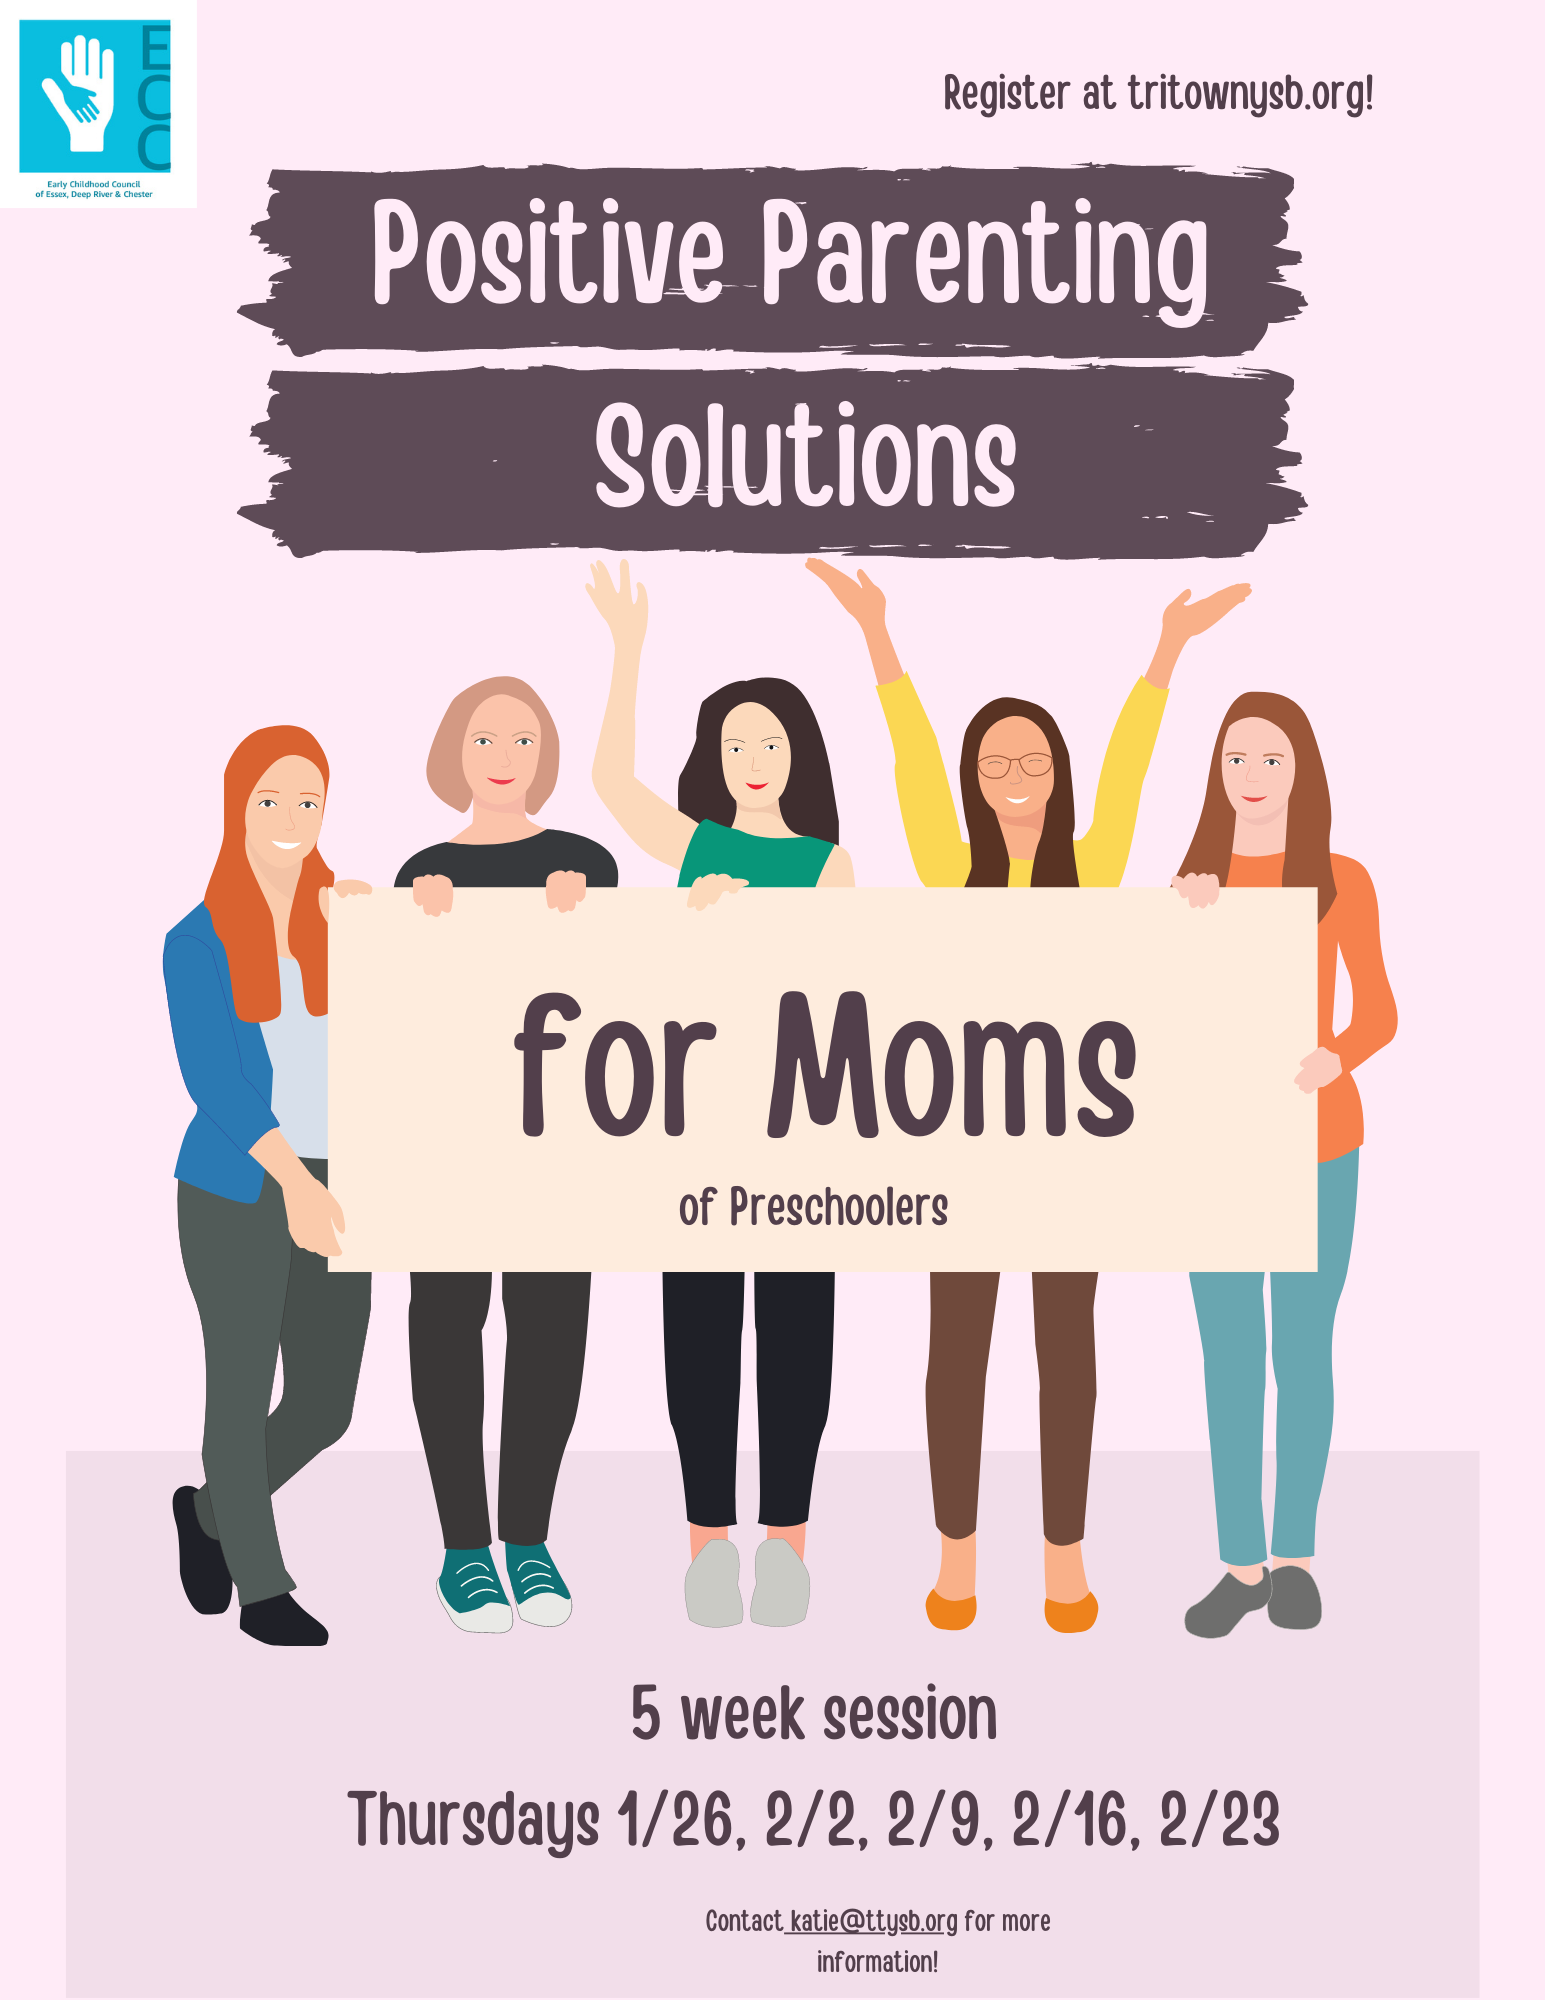 Positive Solutions for Moms